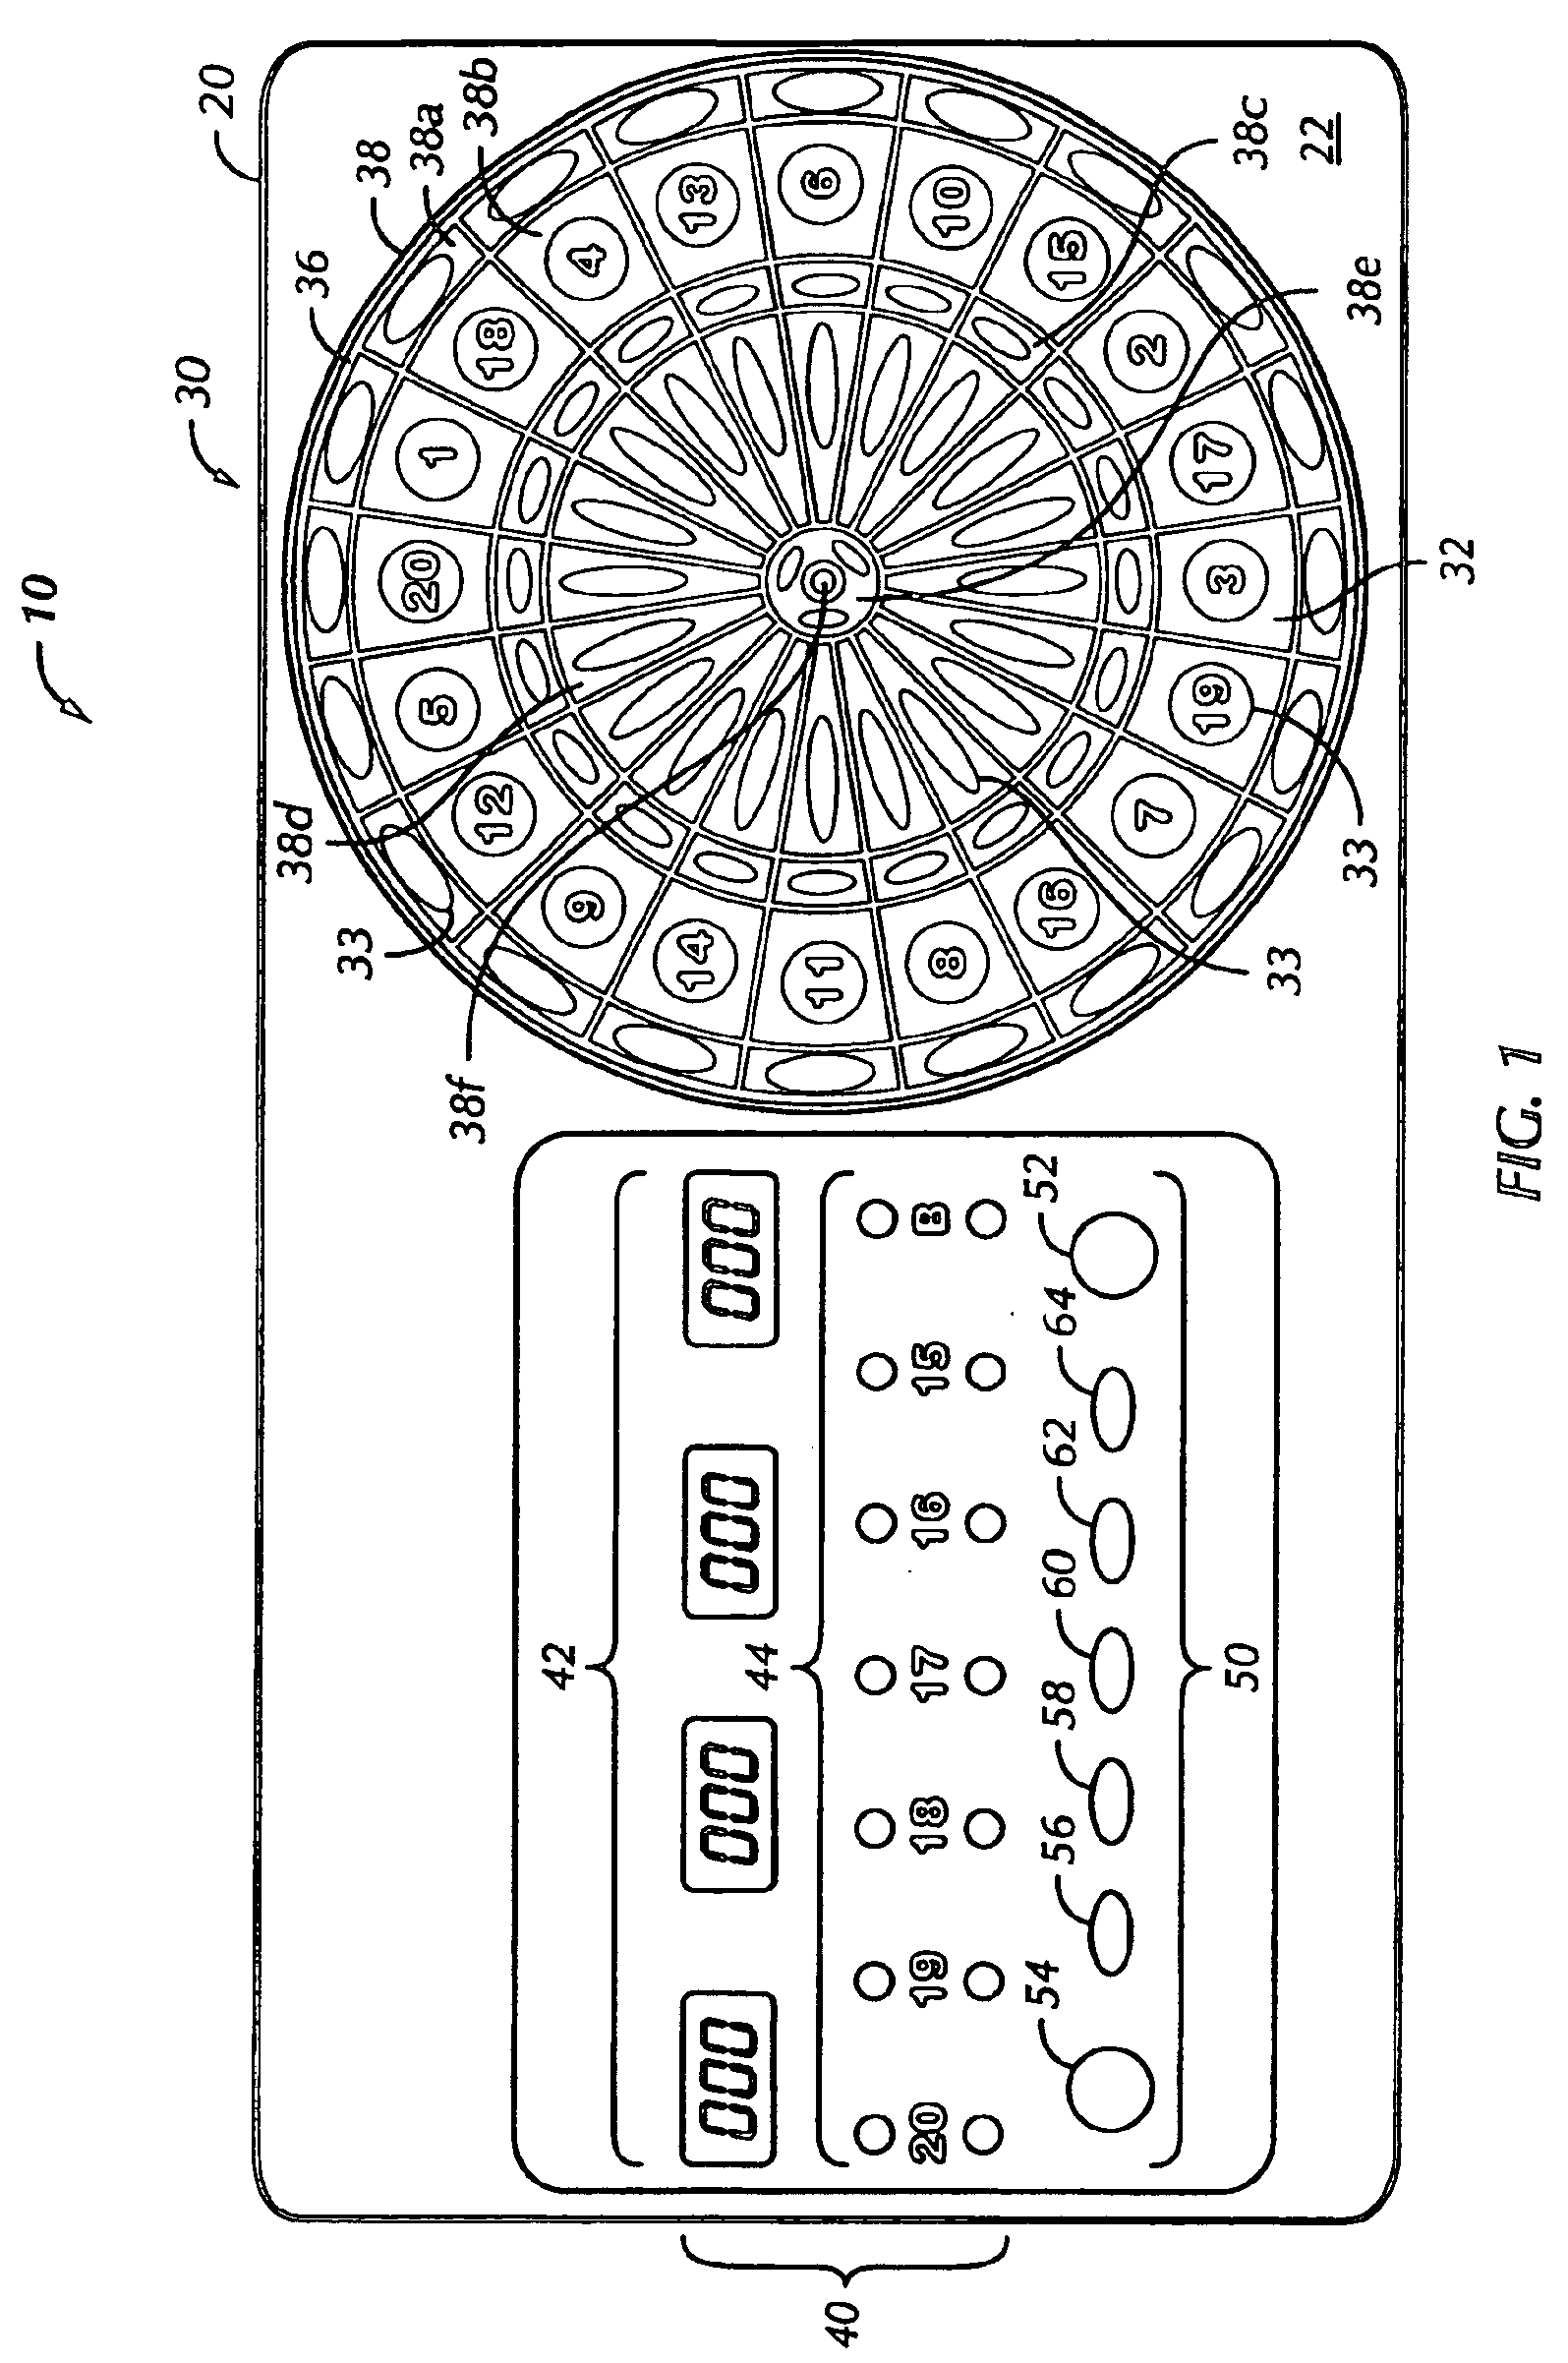 Touch pad scoring apparatus for dart games